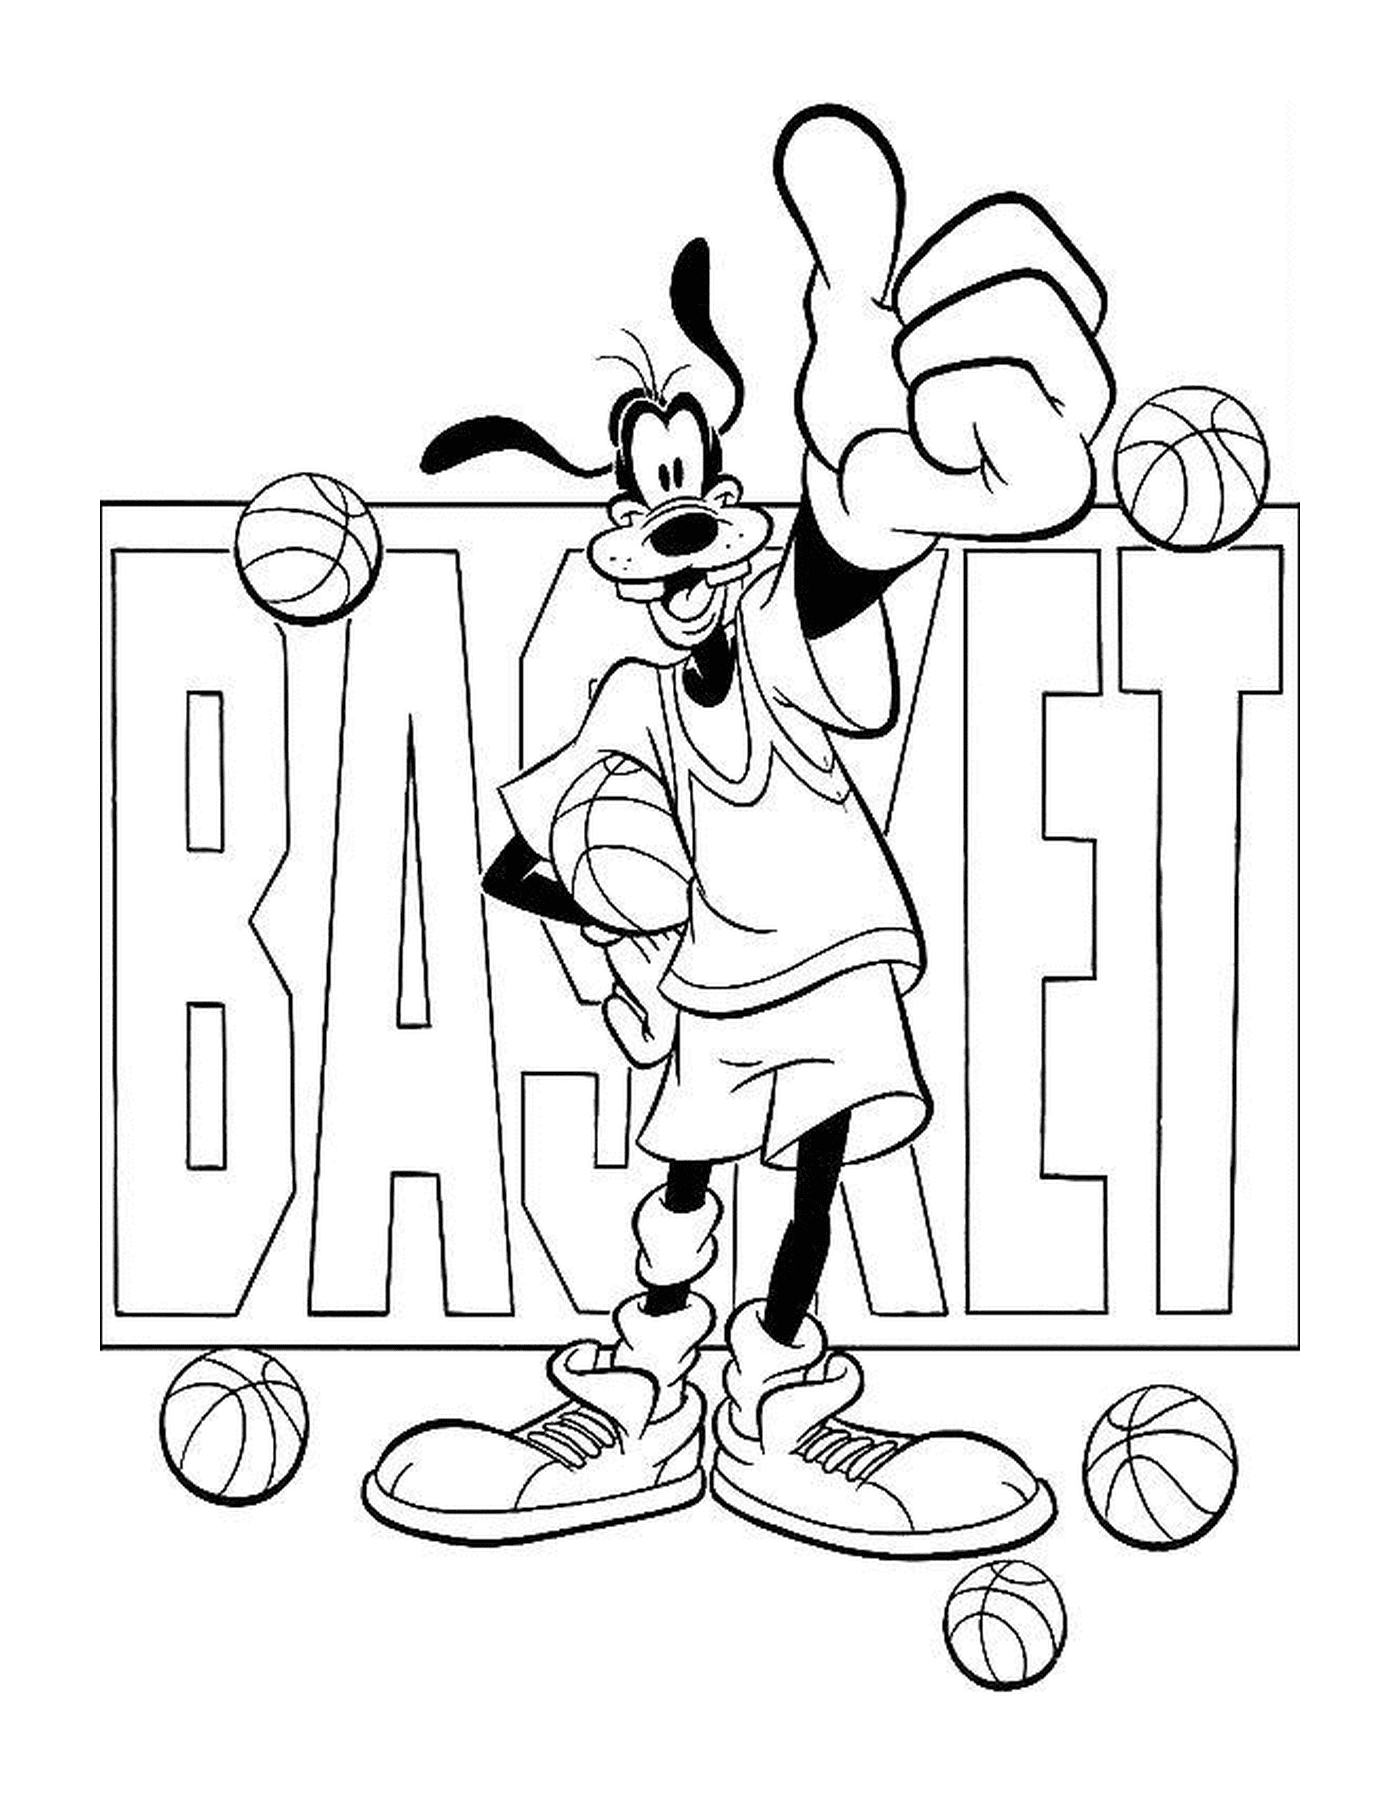  Dingo likes basketball and holds a ball in front of the word basket 